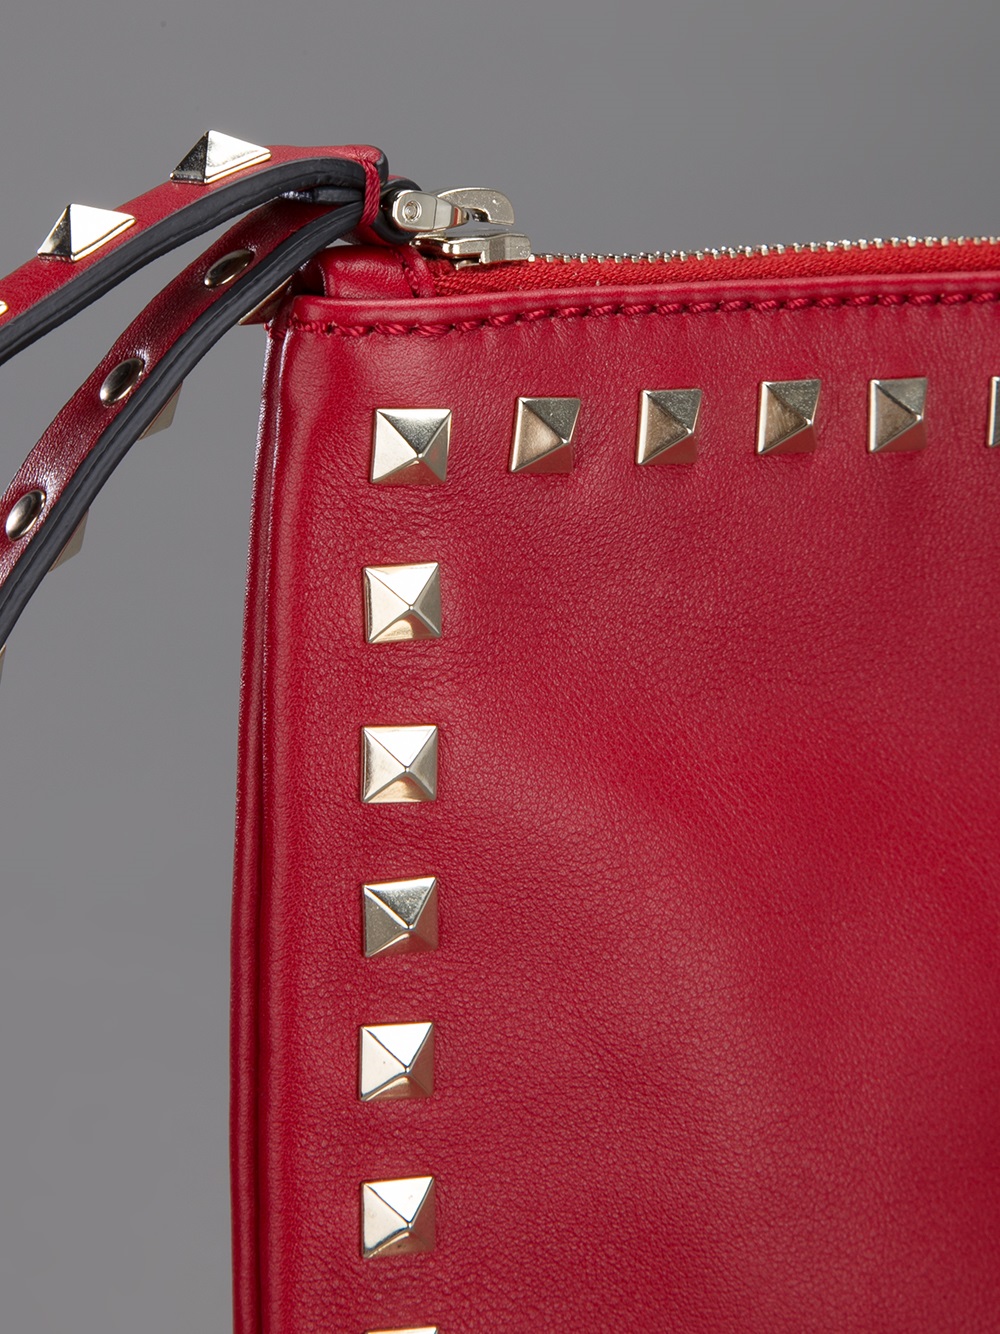 Valentino Large Rockstud Clutch in Red - Lyst